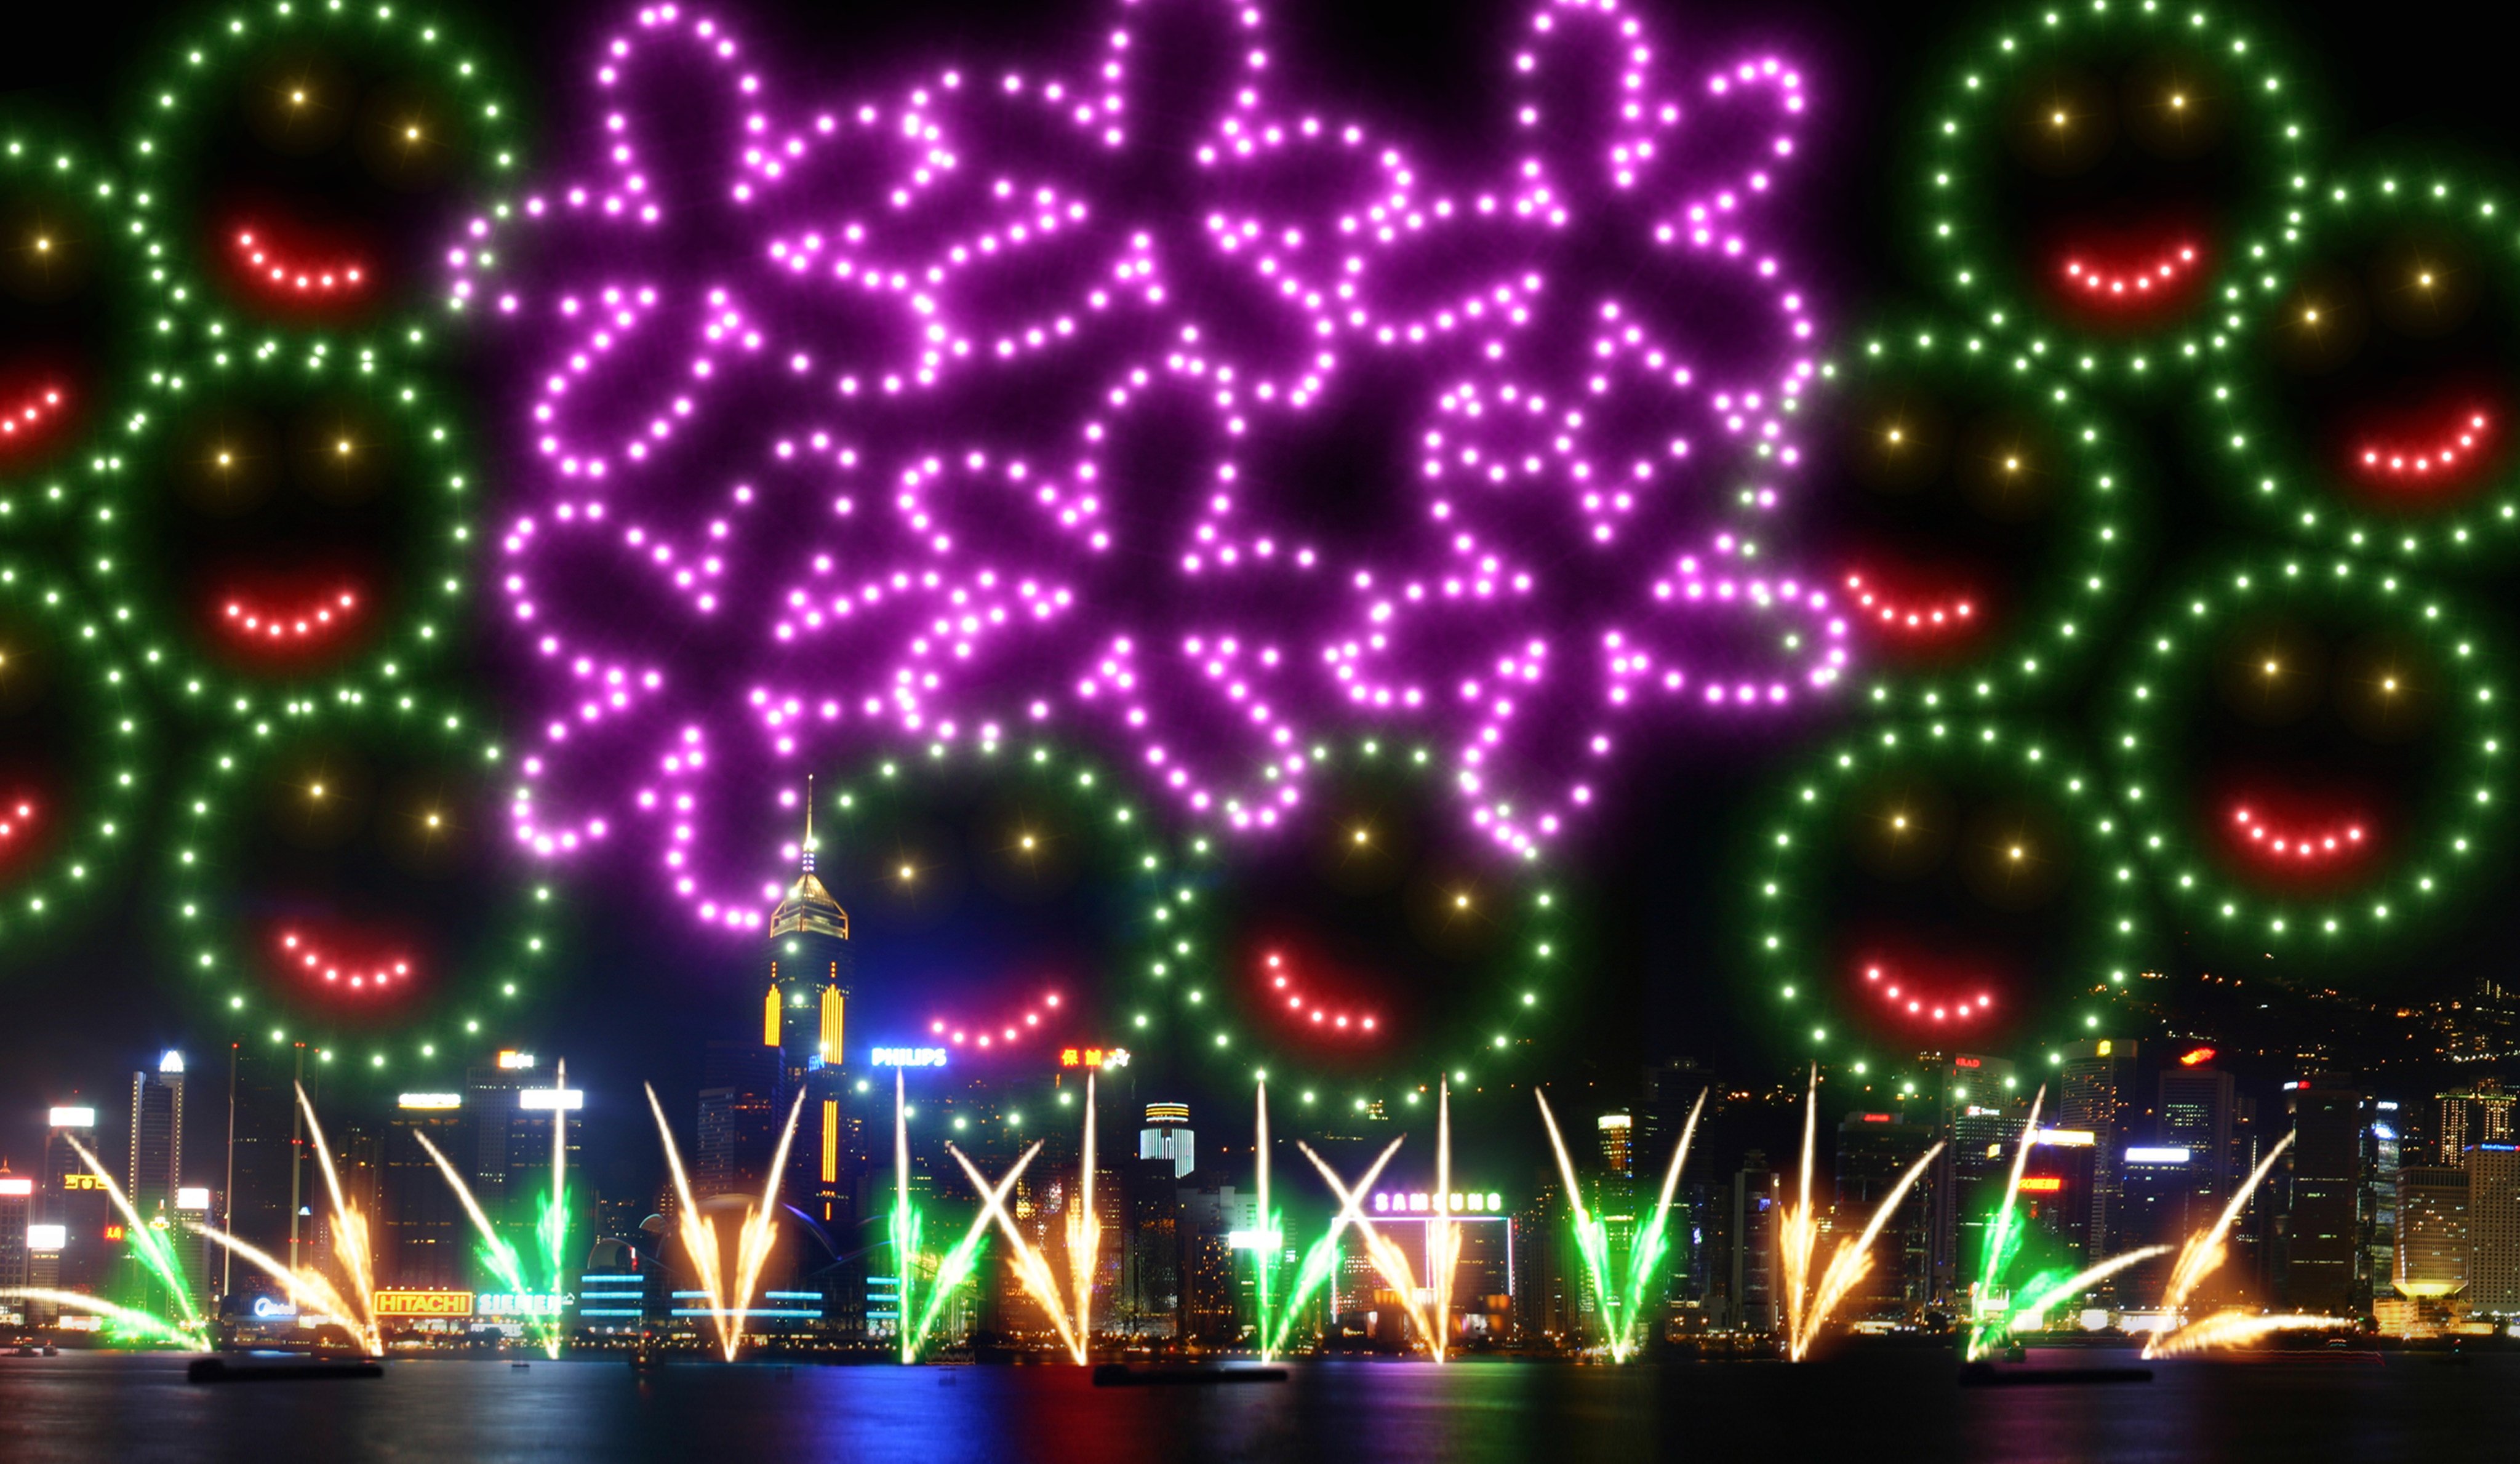 An artist’s impression of the fireworks display designed to celebrate National Day on October 1. Photo: Handout